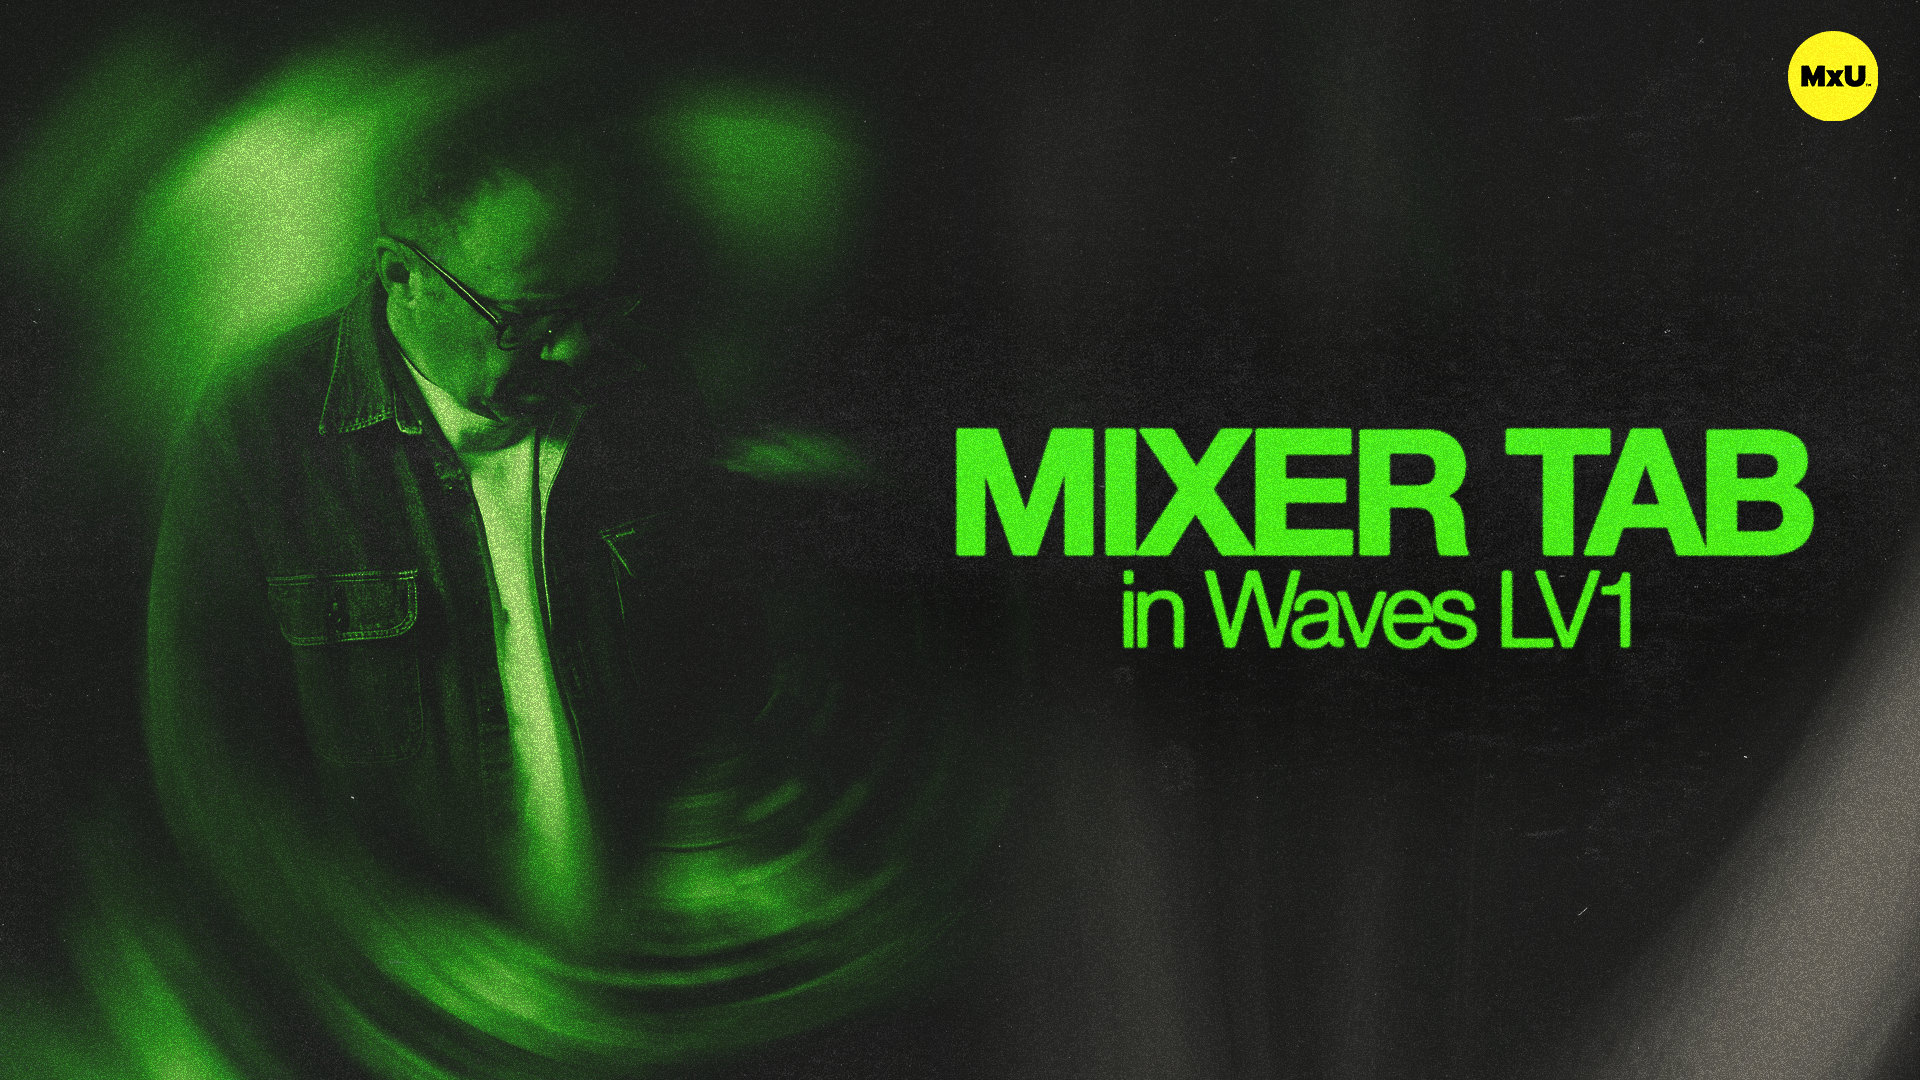 Mixer Tab in Waves LV1